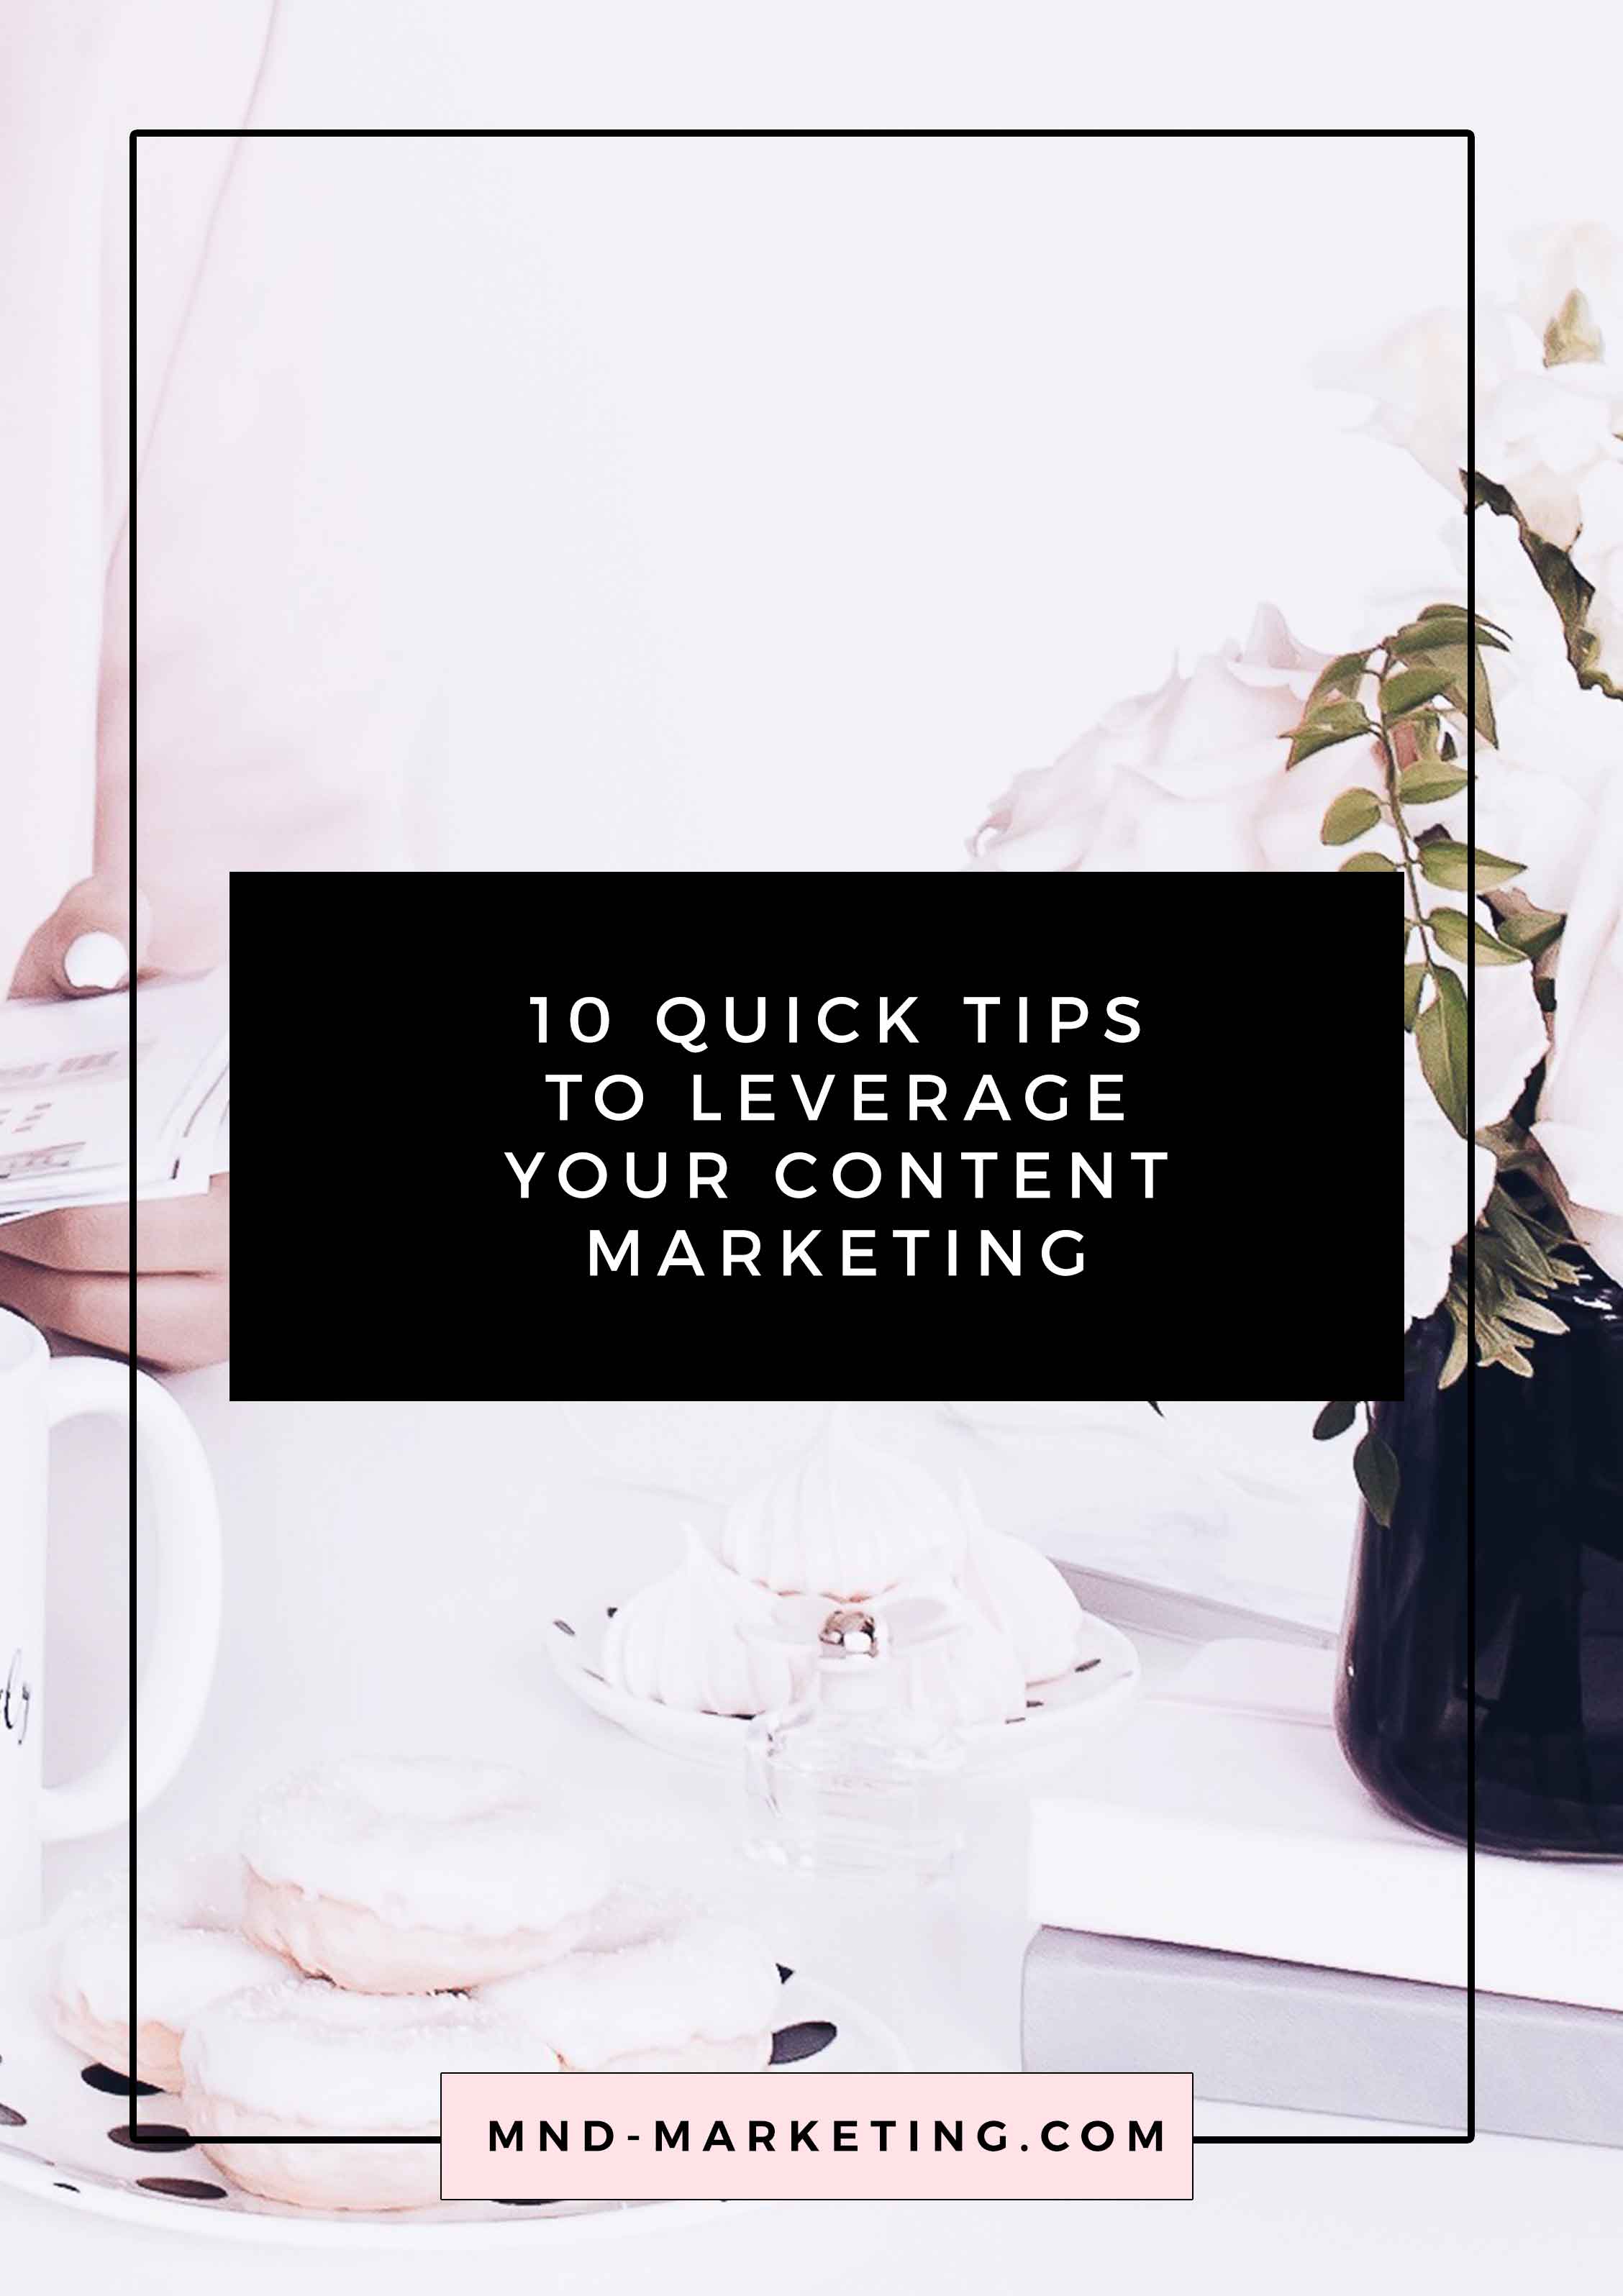 10-Quick-Tips-to-Leverage-Your-Content-Marketing_Pinterest